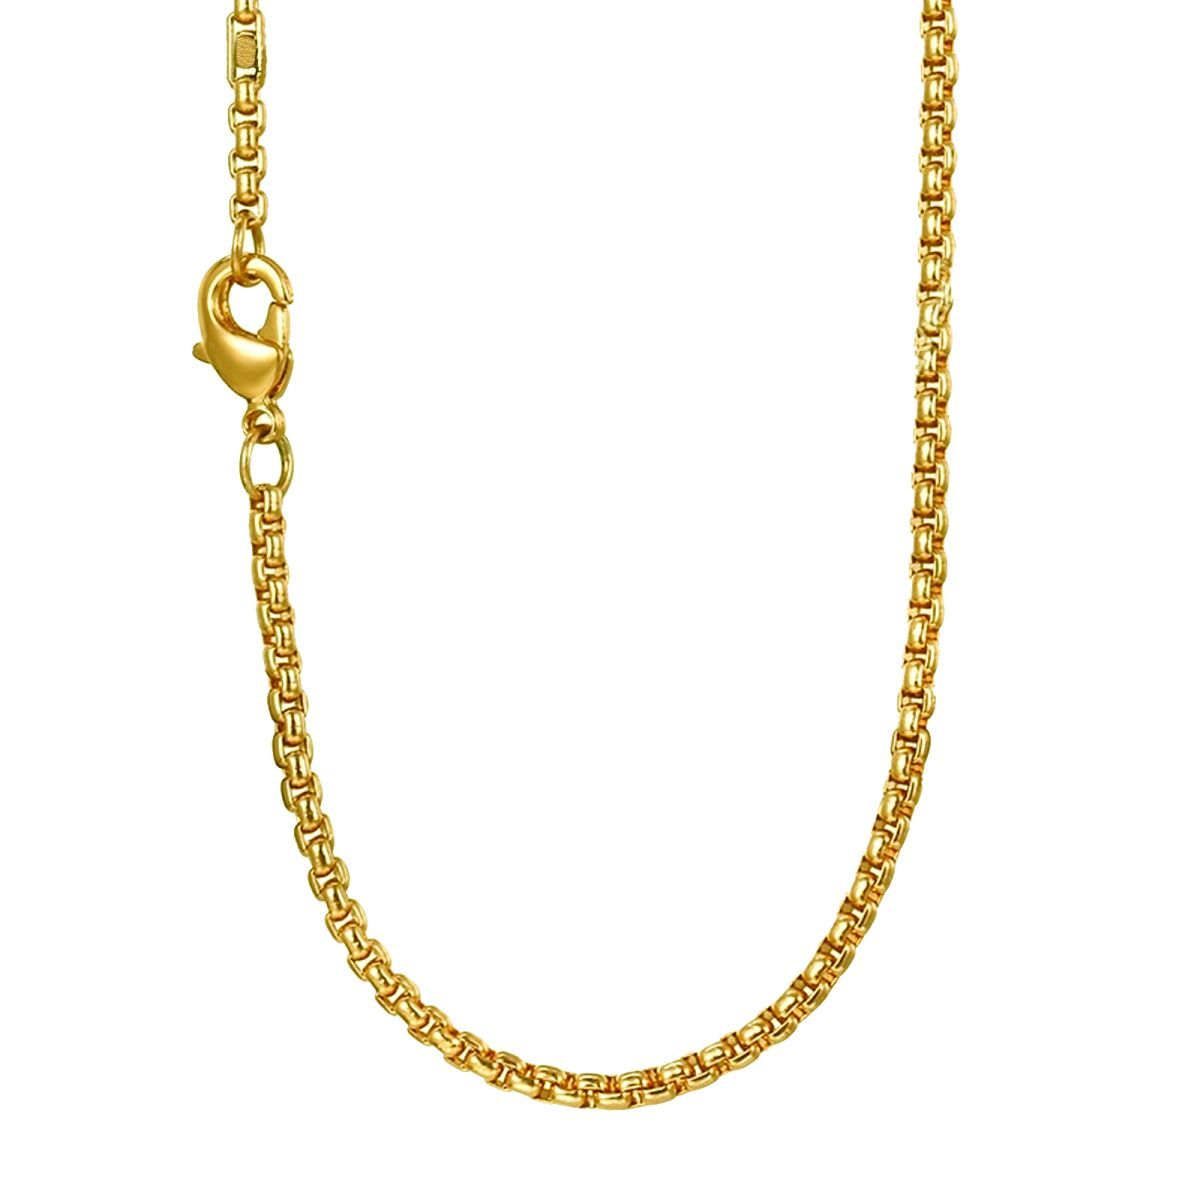 Box Link 22K Gold 316L Stainless Steel Necklace Chain 23 Men Women – ZIVOM